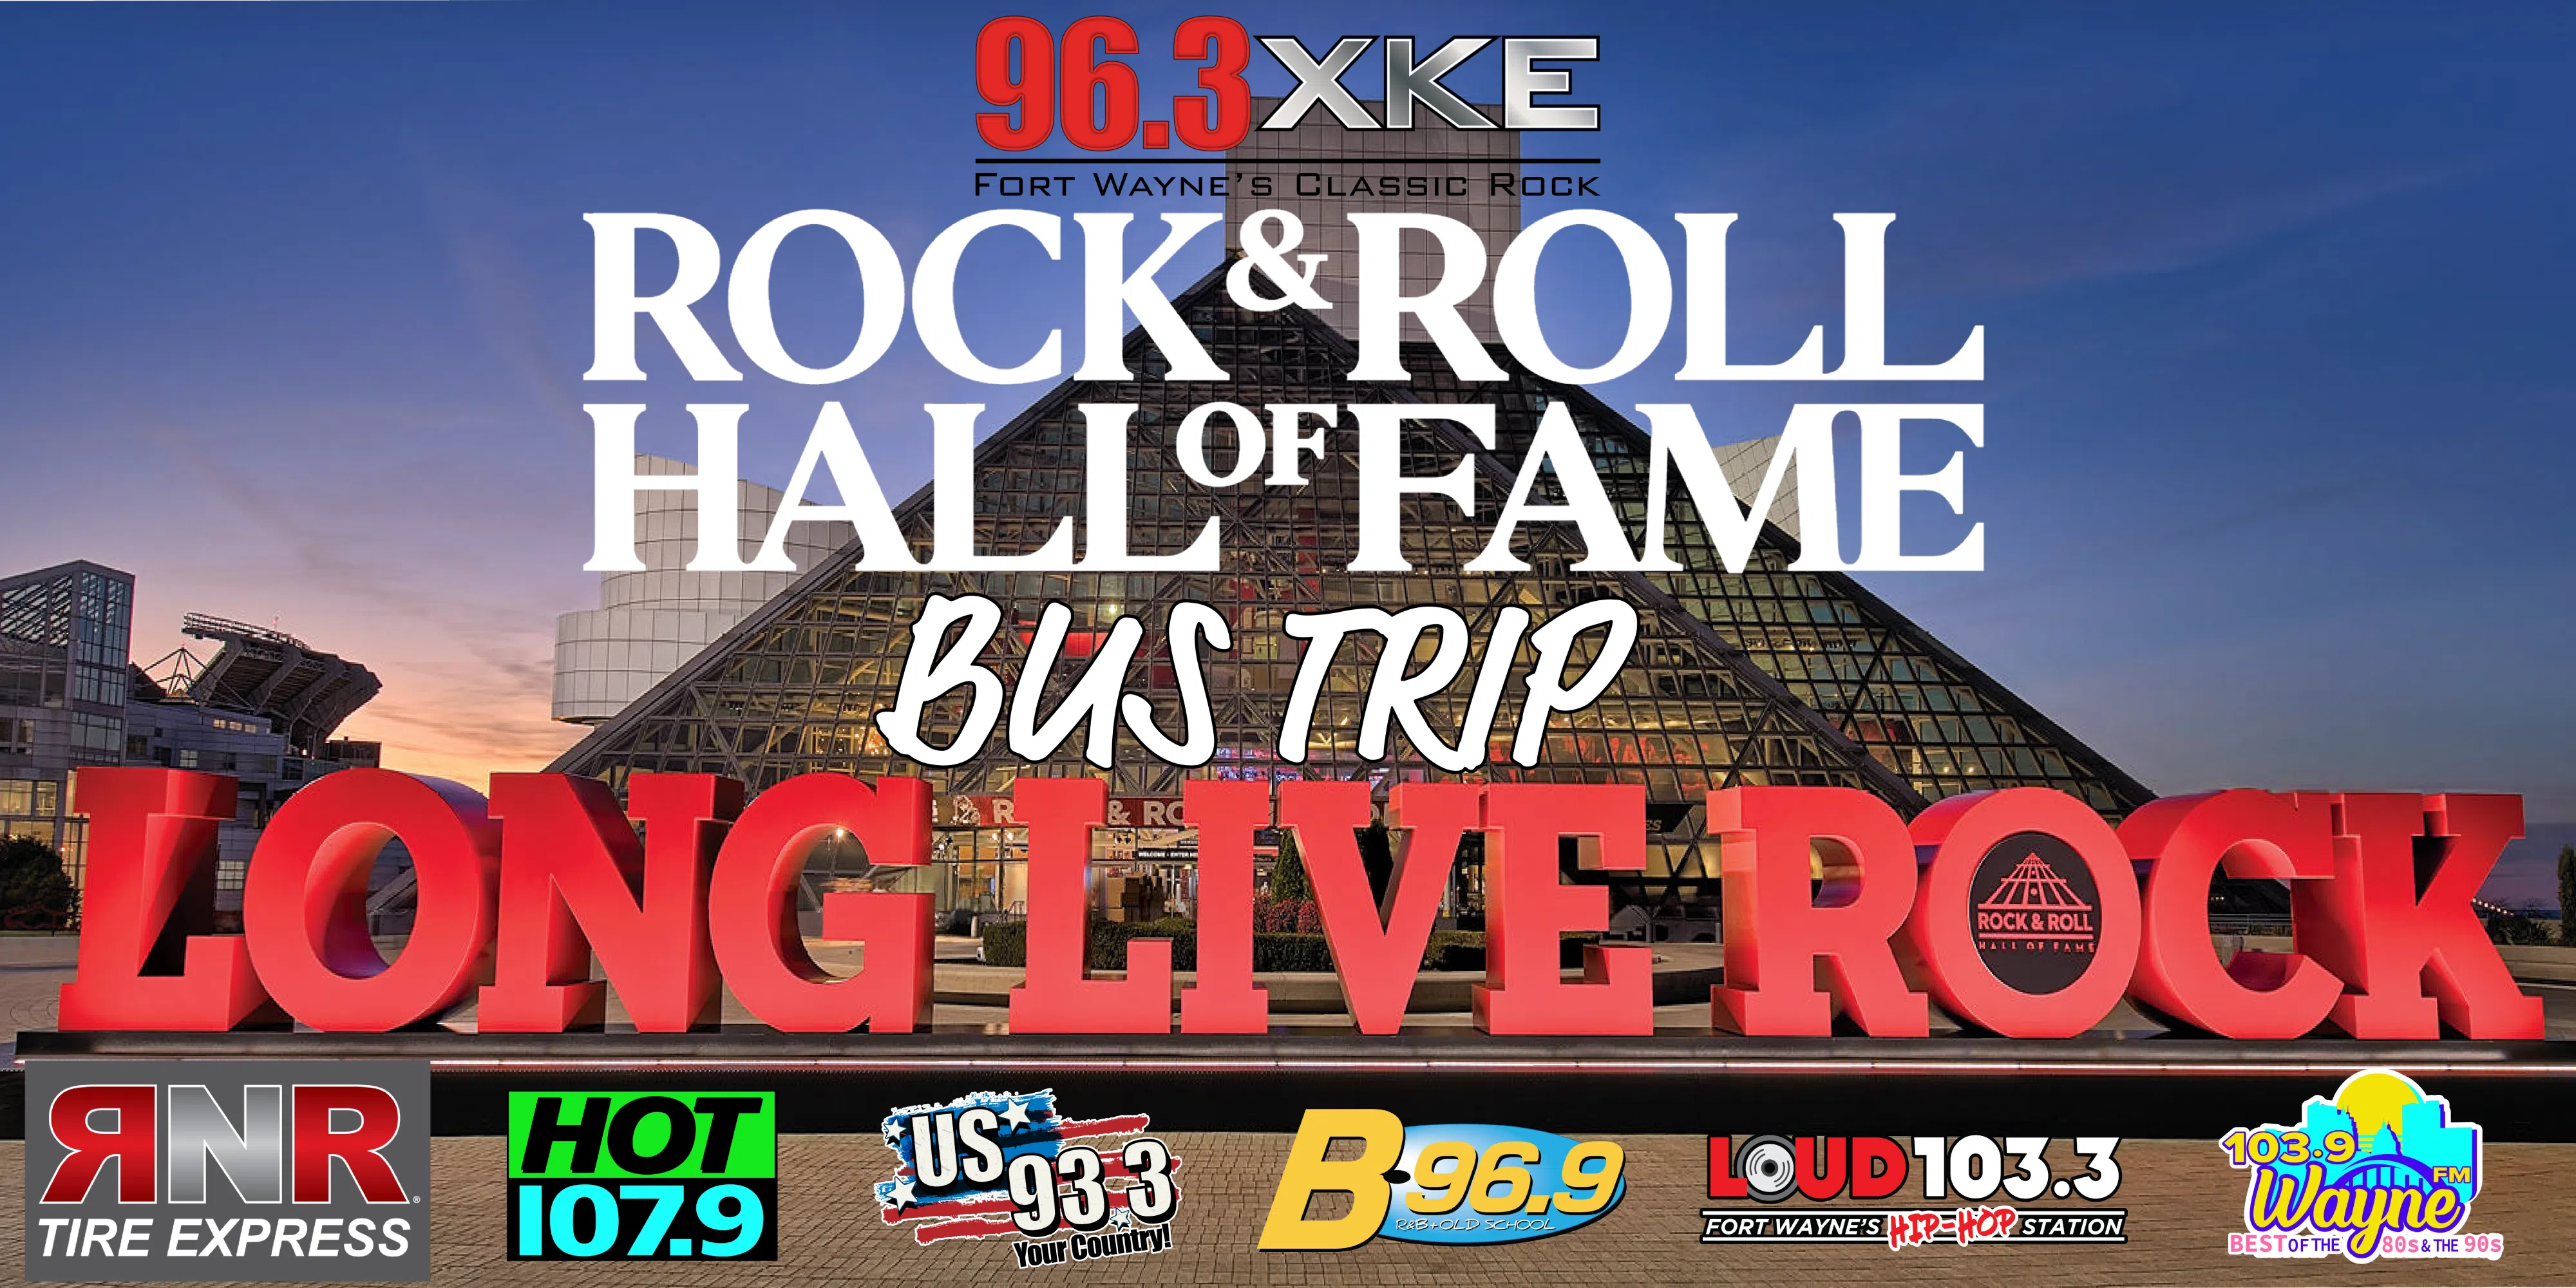 Feature: https://www.eventbrite.com/e/rock-roll-hall-of-fame-road-trip-wednesday-june-19th-tickets-901483199517